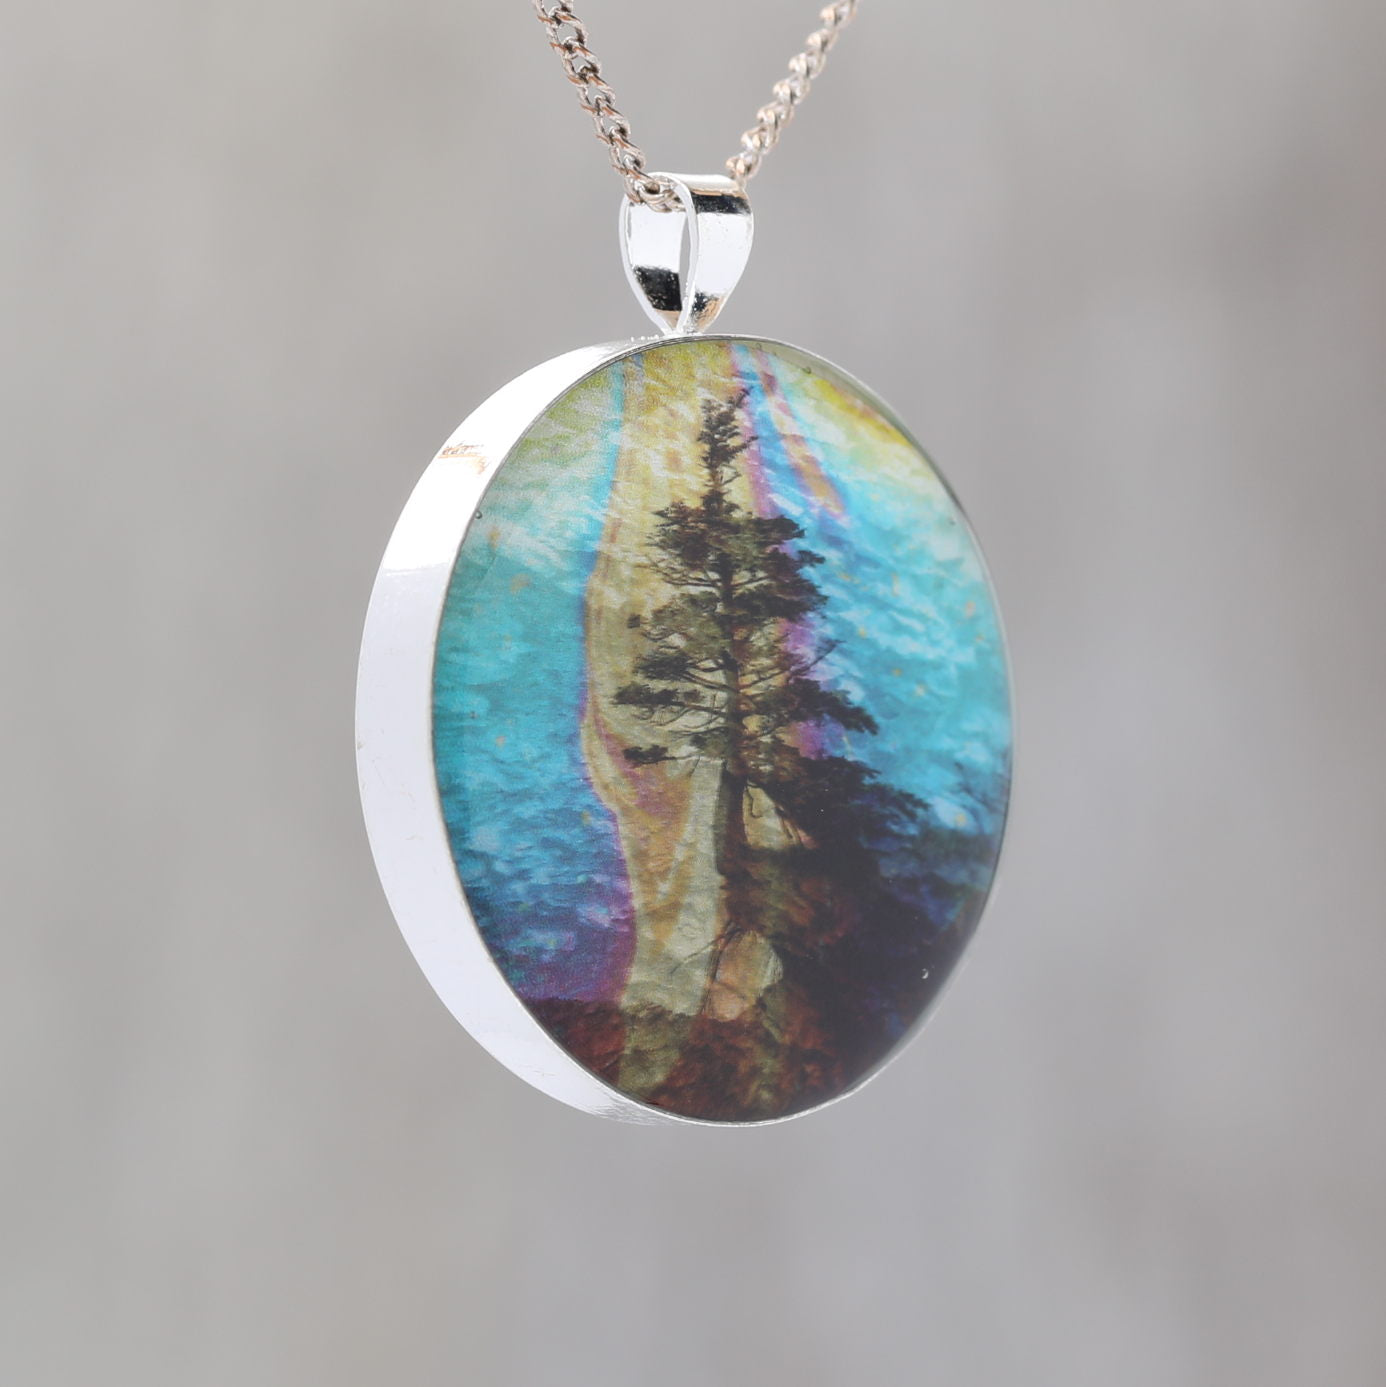 Hanging On - Glow-in-the-dark pendant with a surreal image of trees